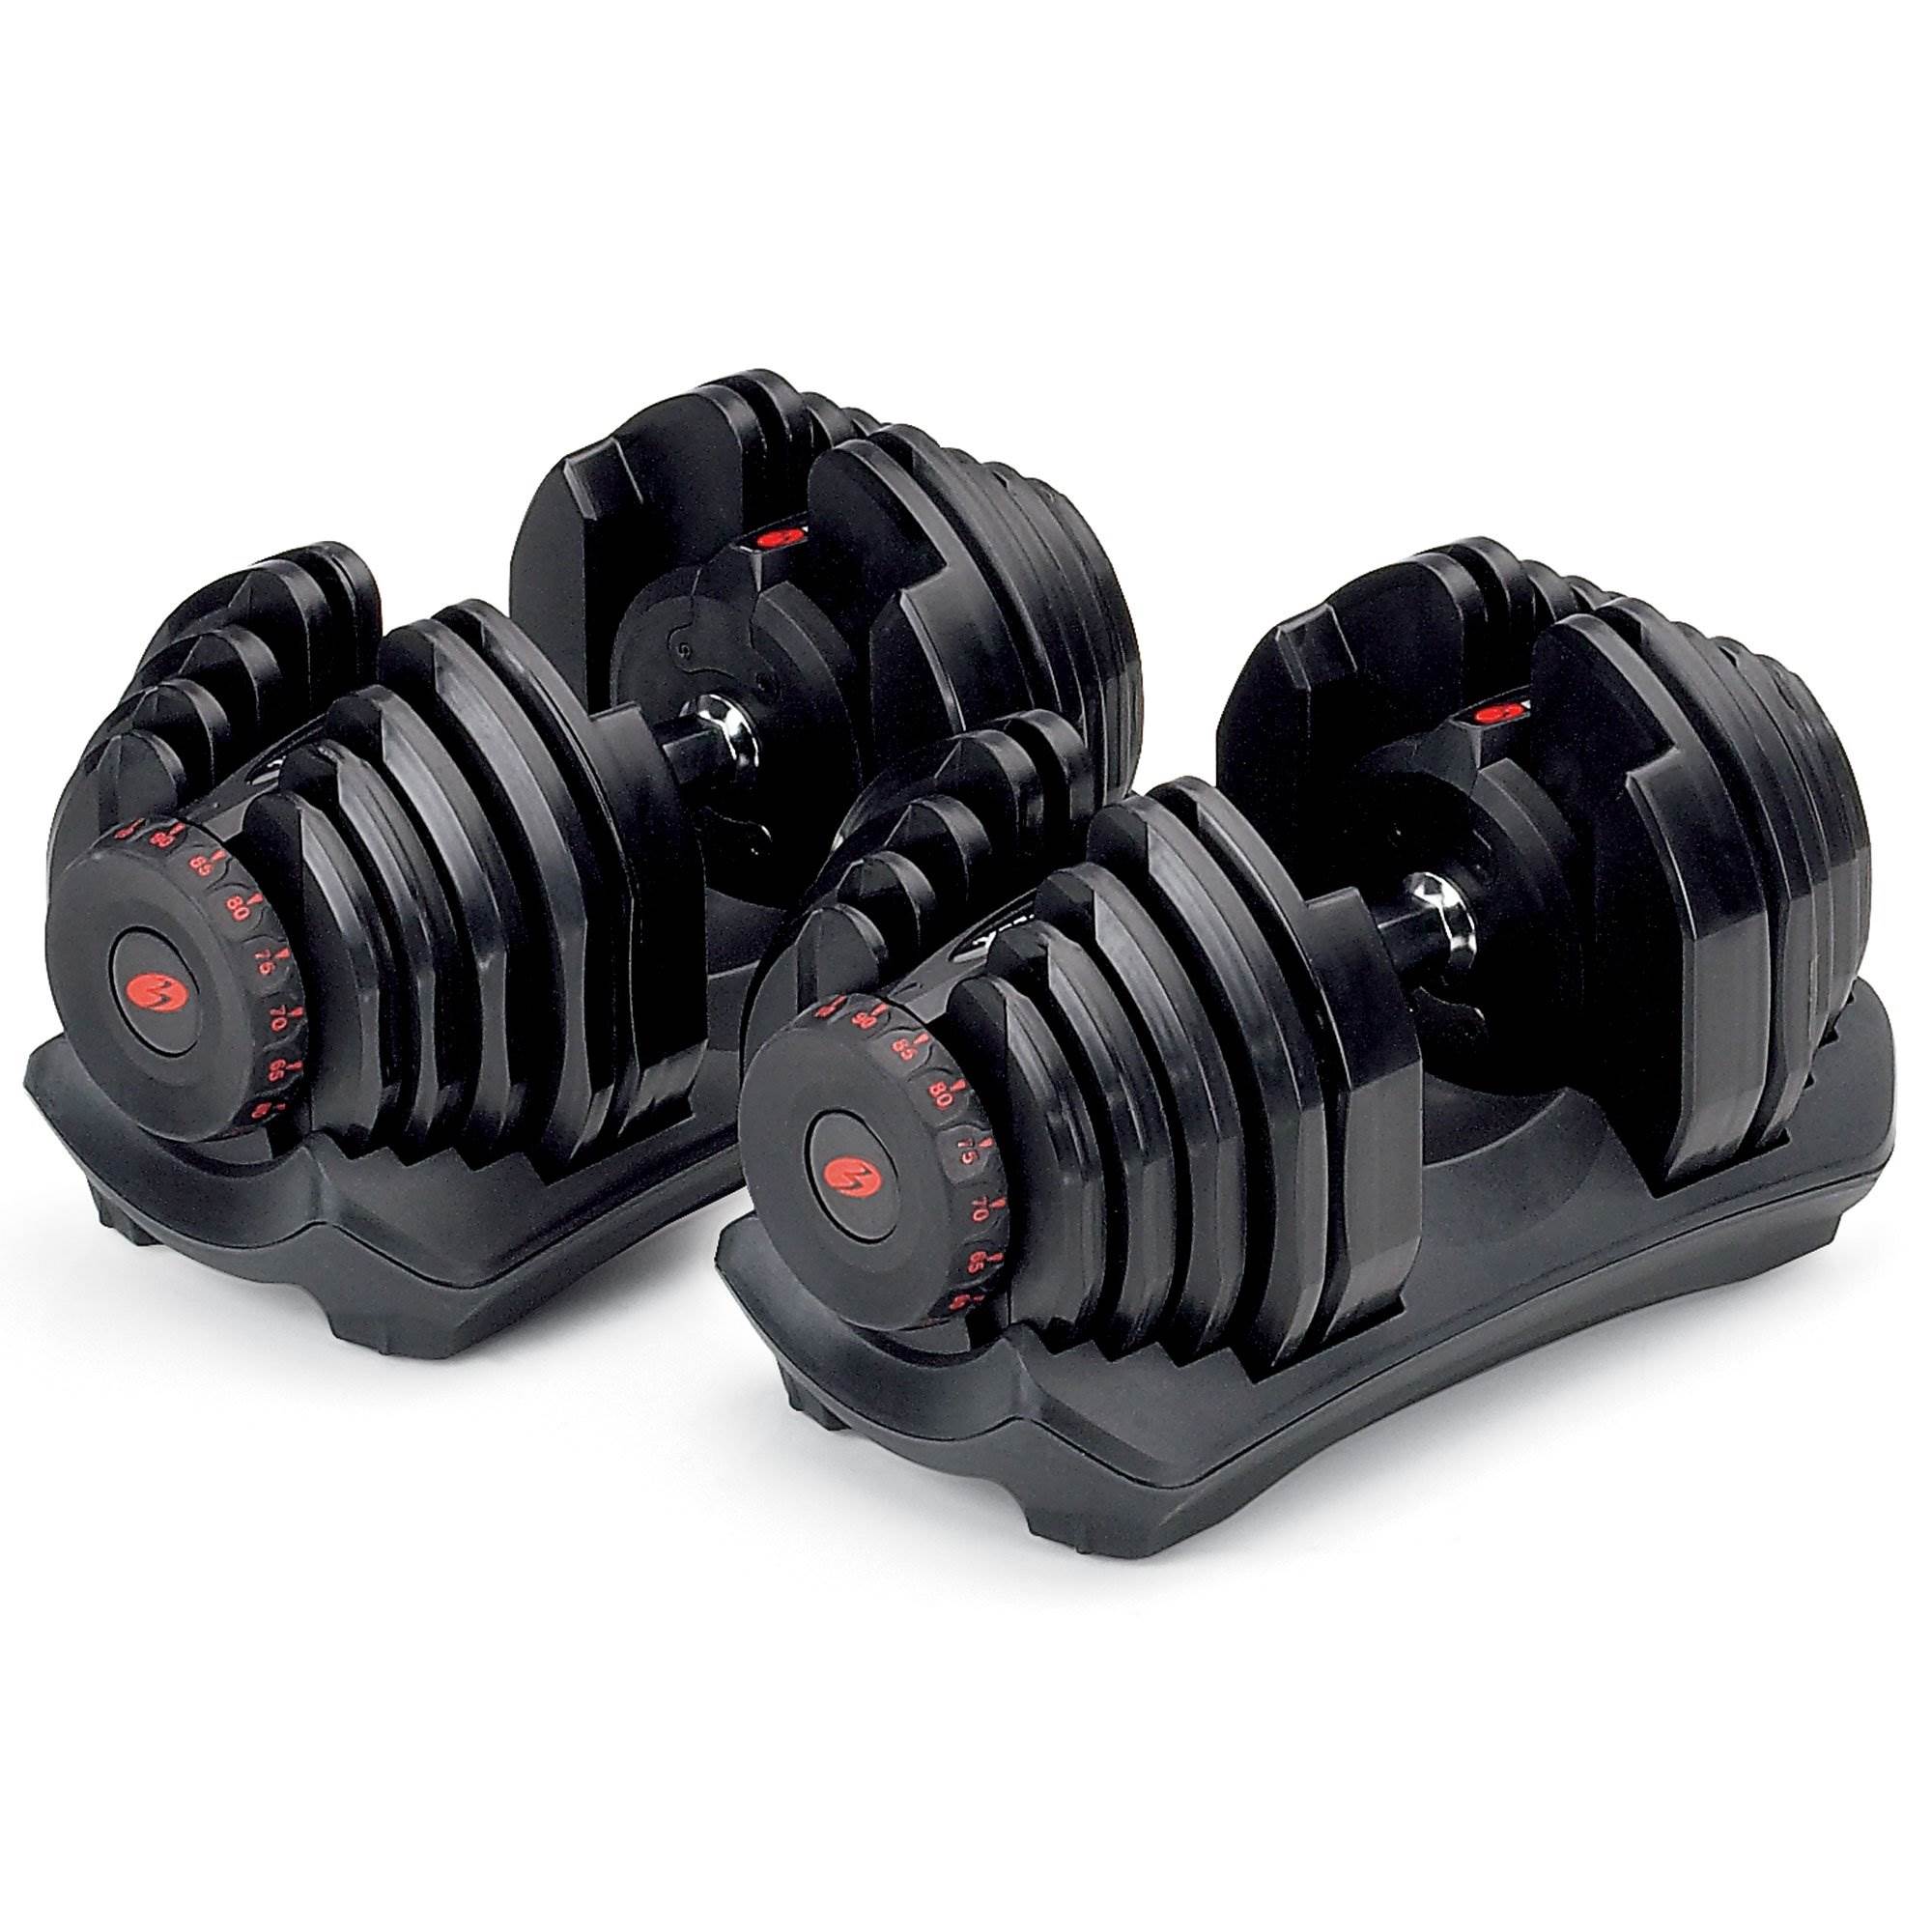 Bowflex SelectTech 1090 Adjustable Workout Exercise Dumbbell Weights, Pair - image 1 of 12